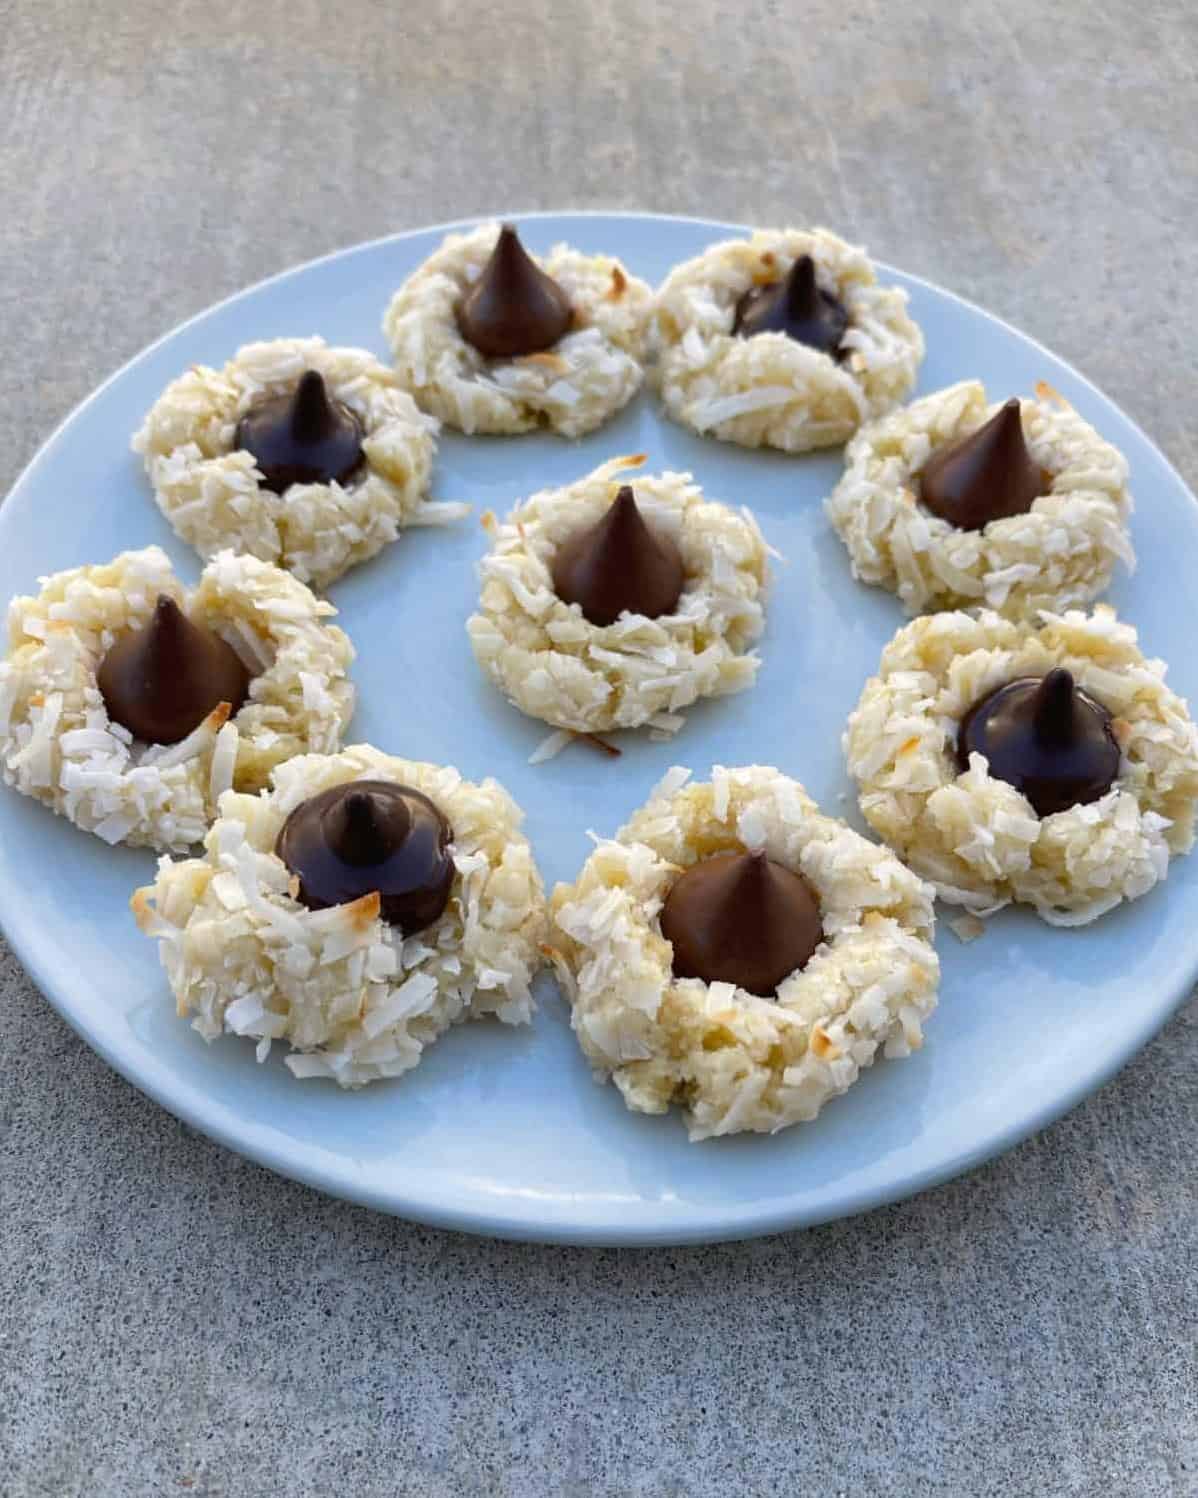  Who says AIP desserts can't be delicious? These macaroons are a game changer!